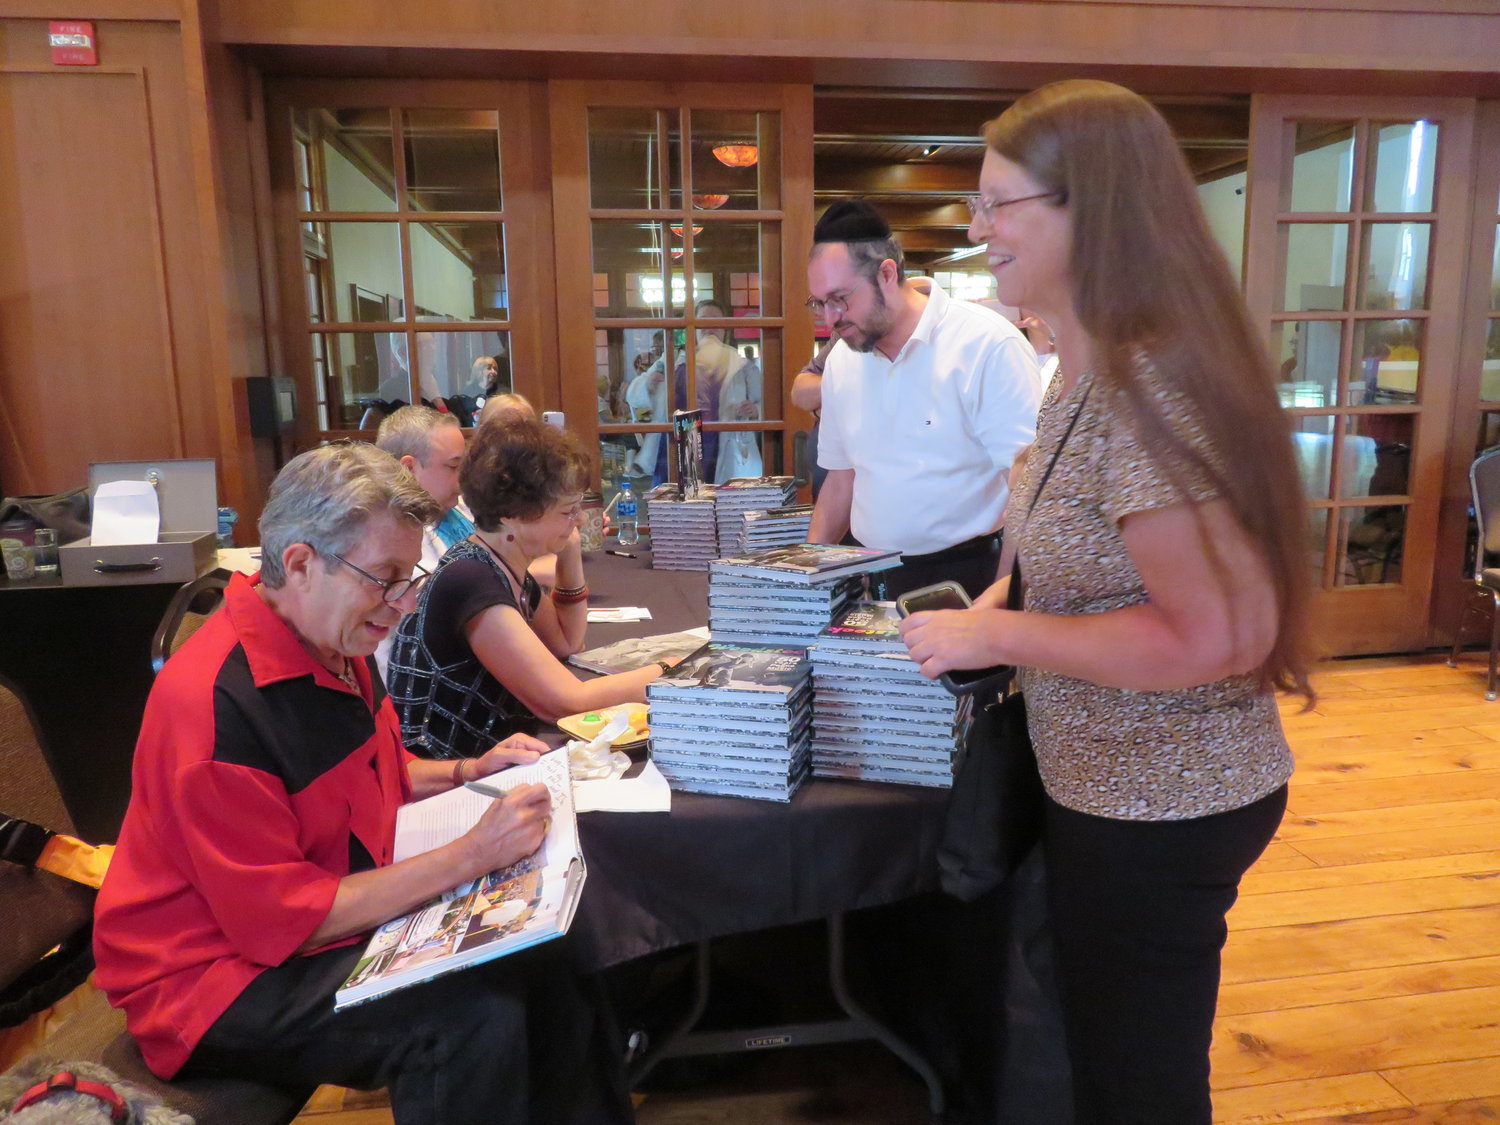 The panelists sign copies of “Woodstock: 50 Years of Peace and Music” after discussing the book and each of their connections to the iconc festival.